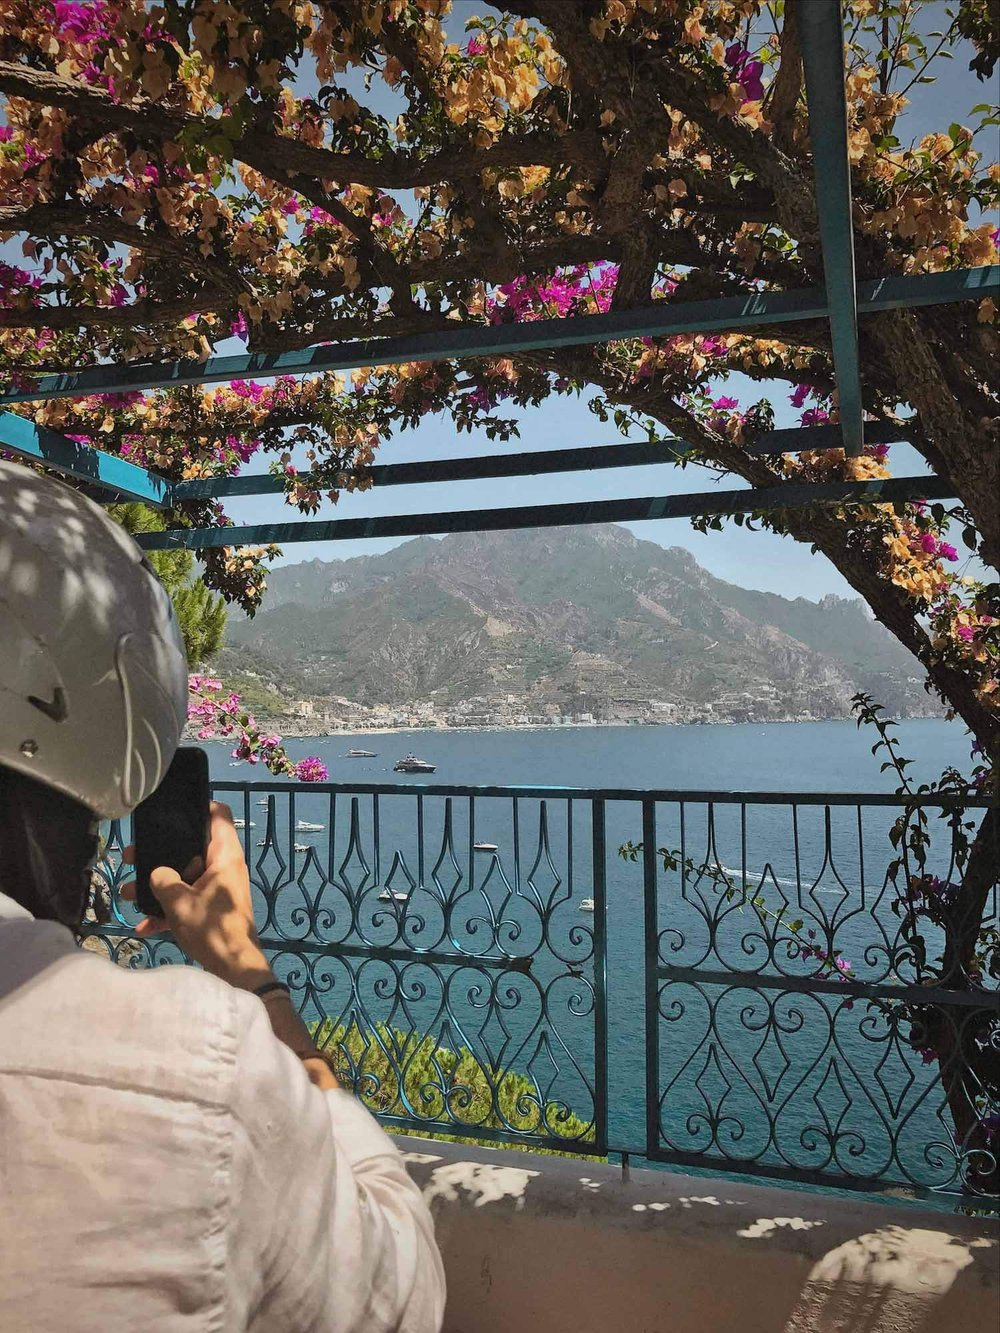 Wondering what to do in Positano? When visiting the Amalfi Coast, don't skip a scooter ride around the coast! 